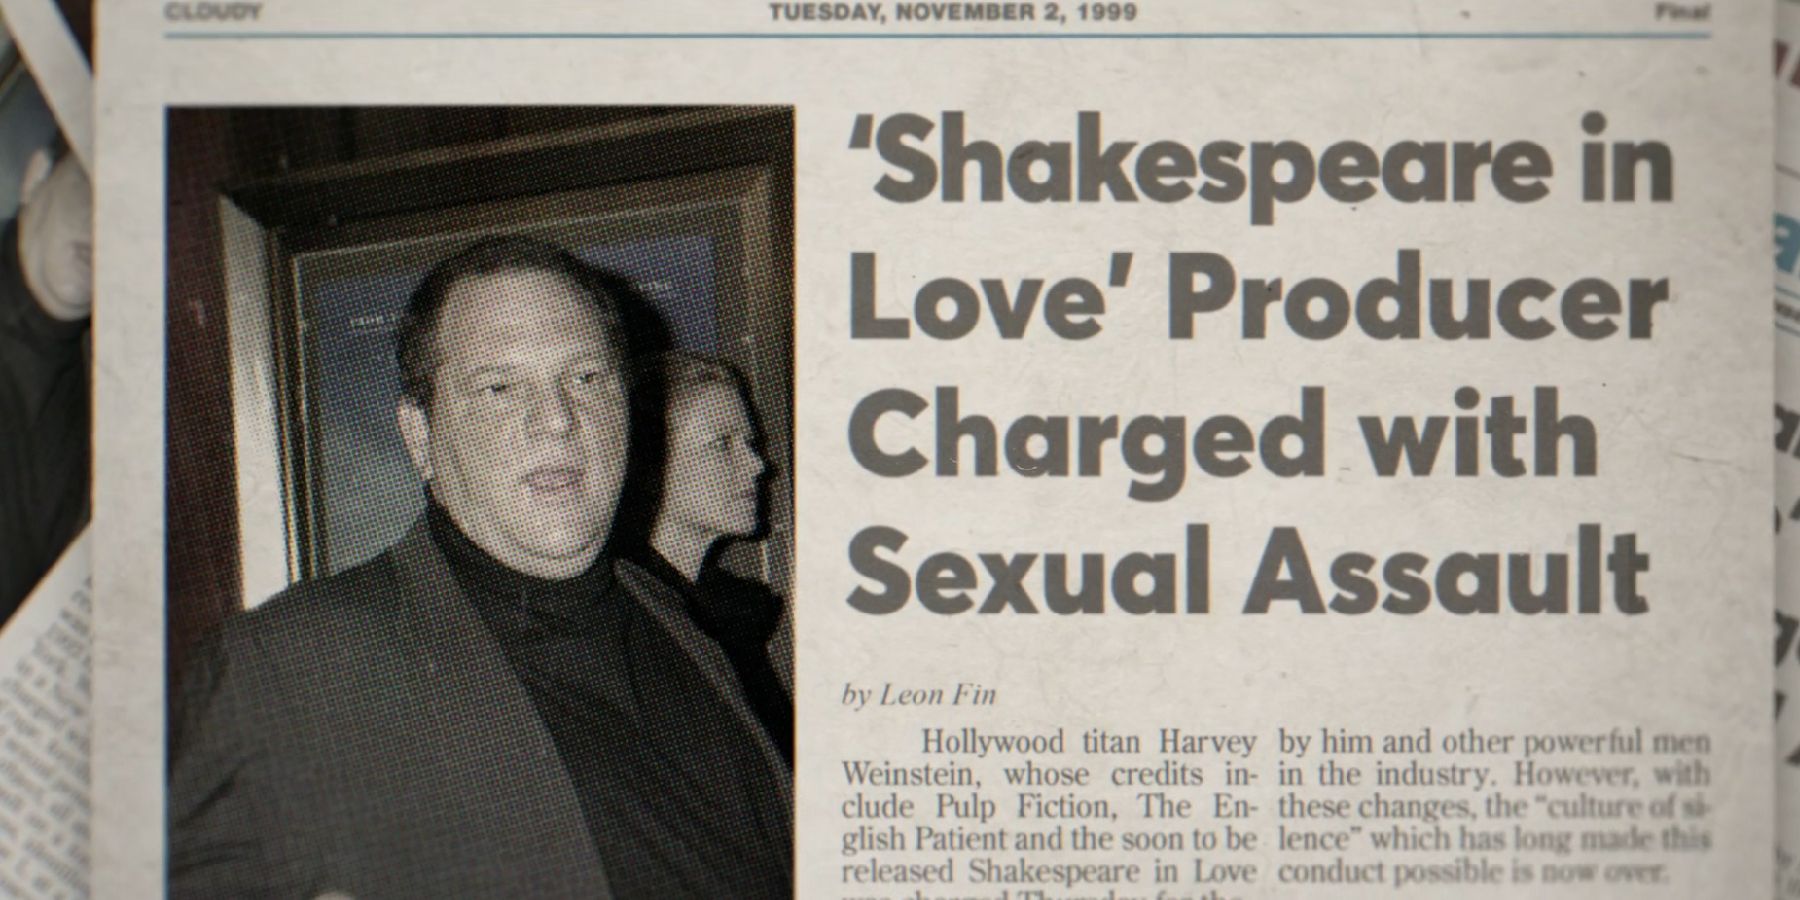 A newspaper reporting Harvey Weinstein's crimes